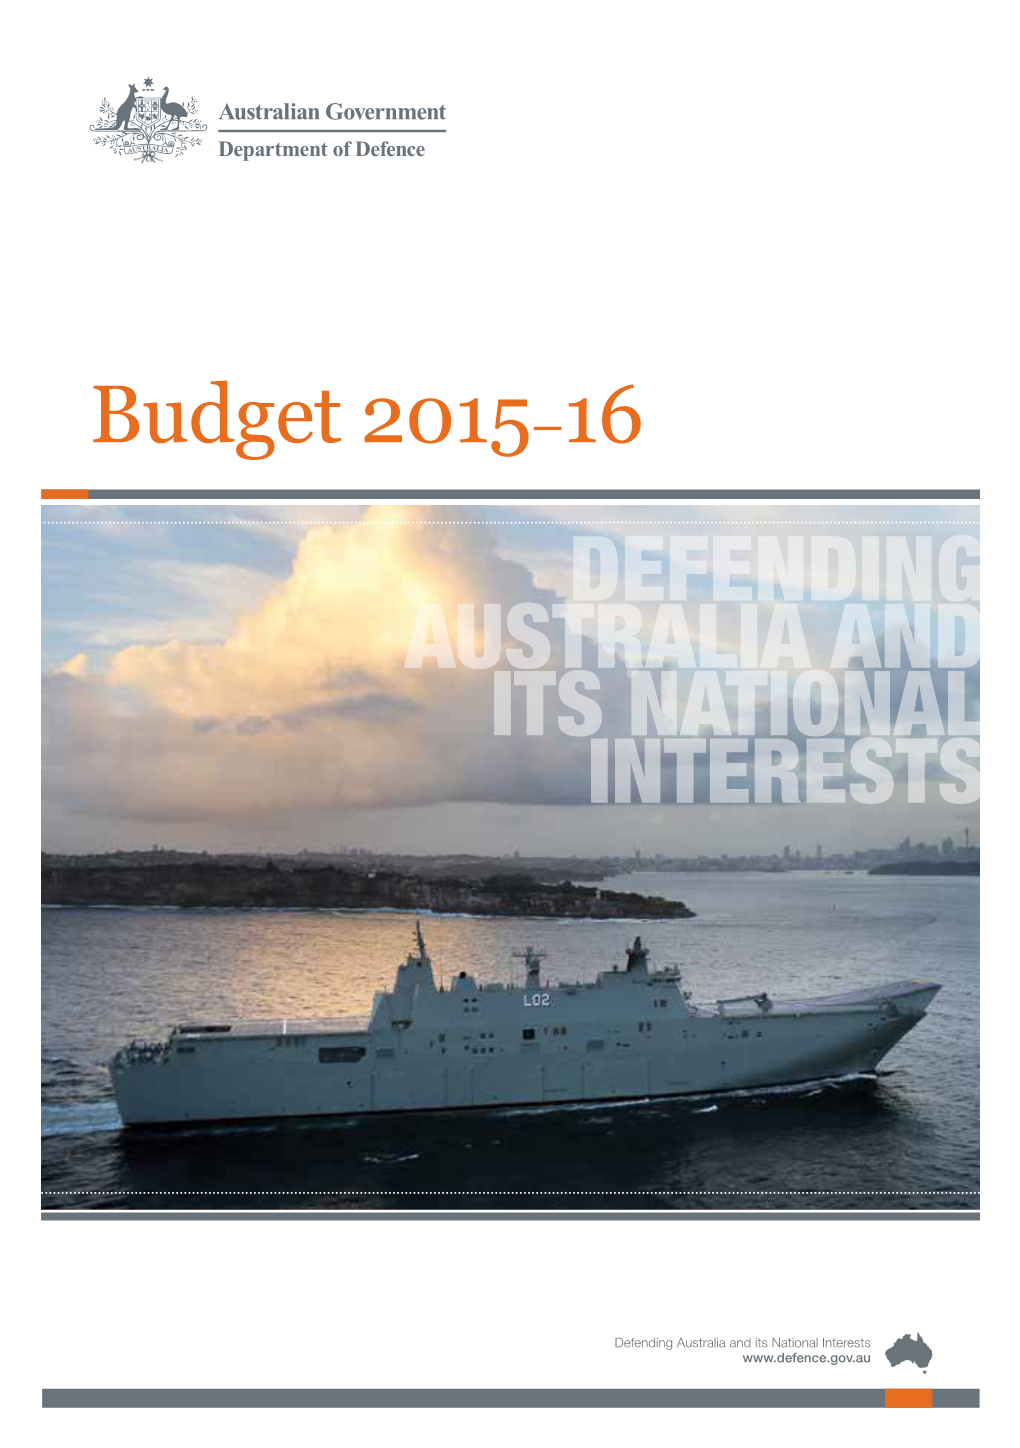 Defending Australia and Its National Interests Ministerial Foreword